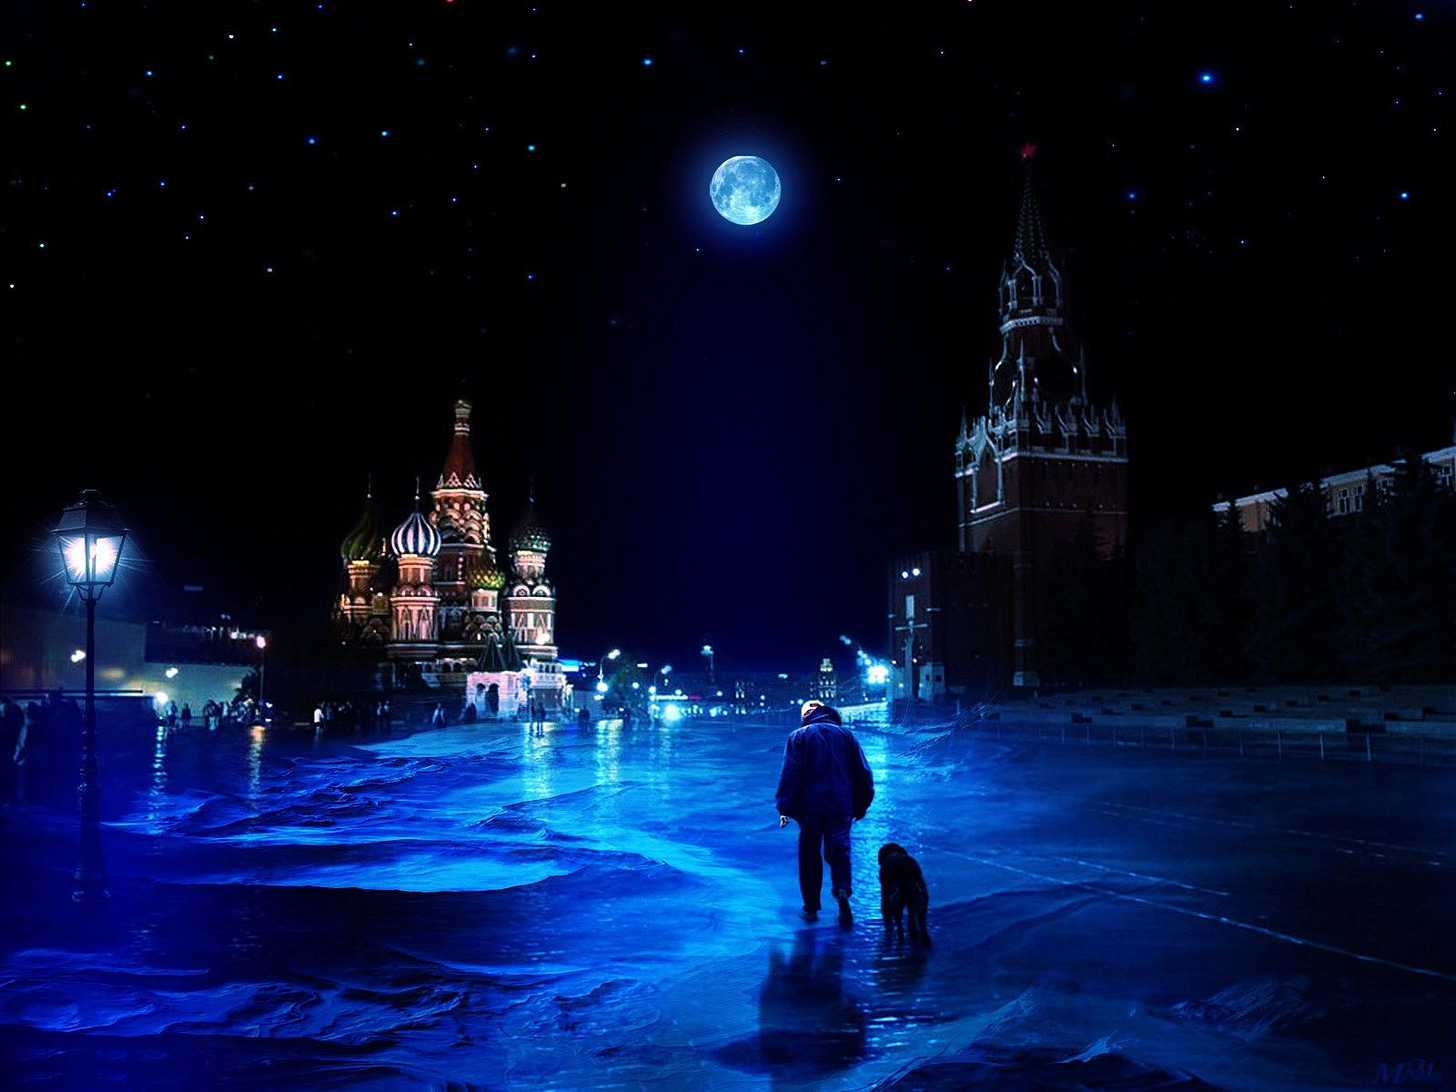 Night Life at Red Square, Moscow, Russia - Wallpaper #32779 | Night life,  Moscow, Moscow russia